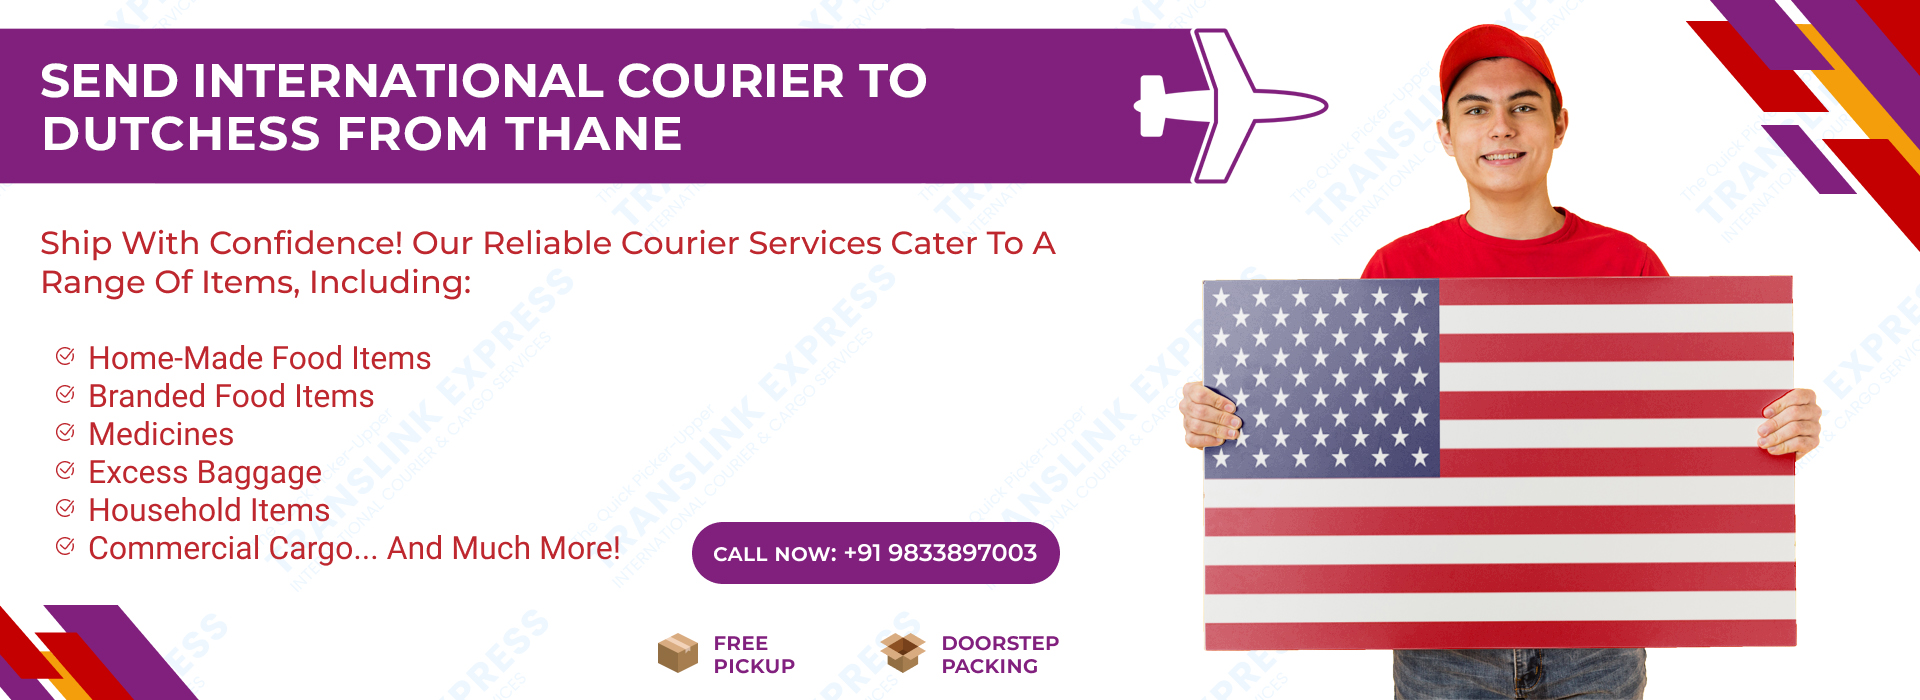 Courier to Dutchess From Thane